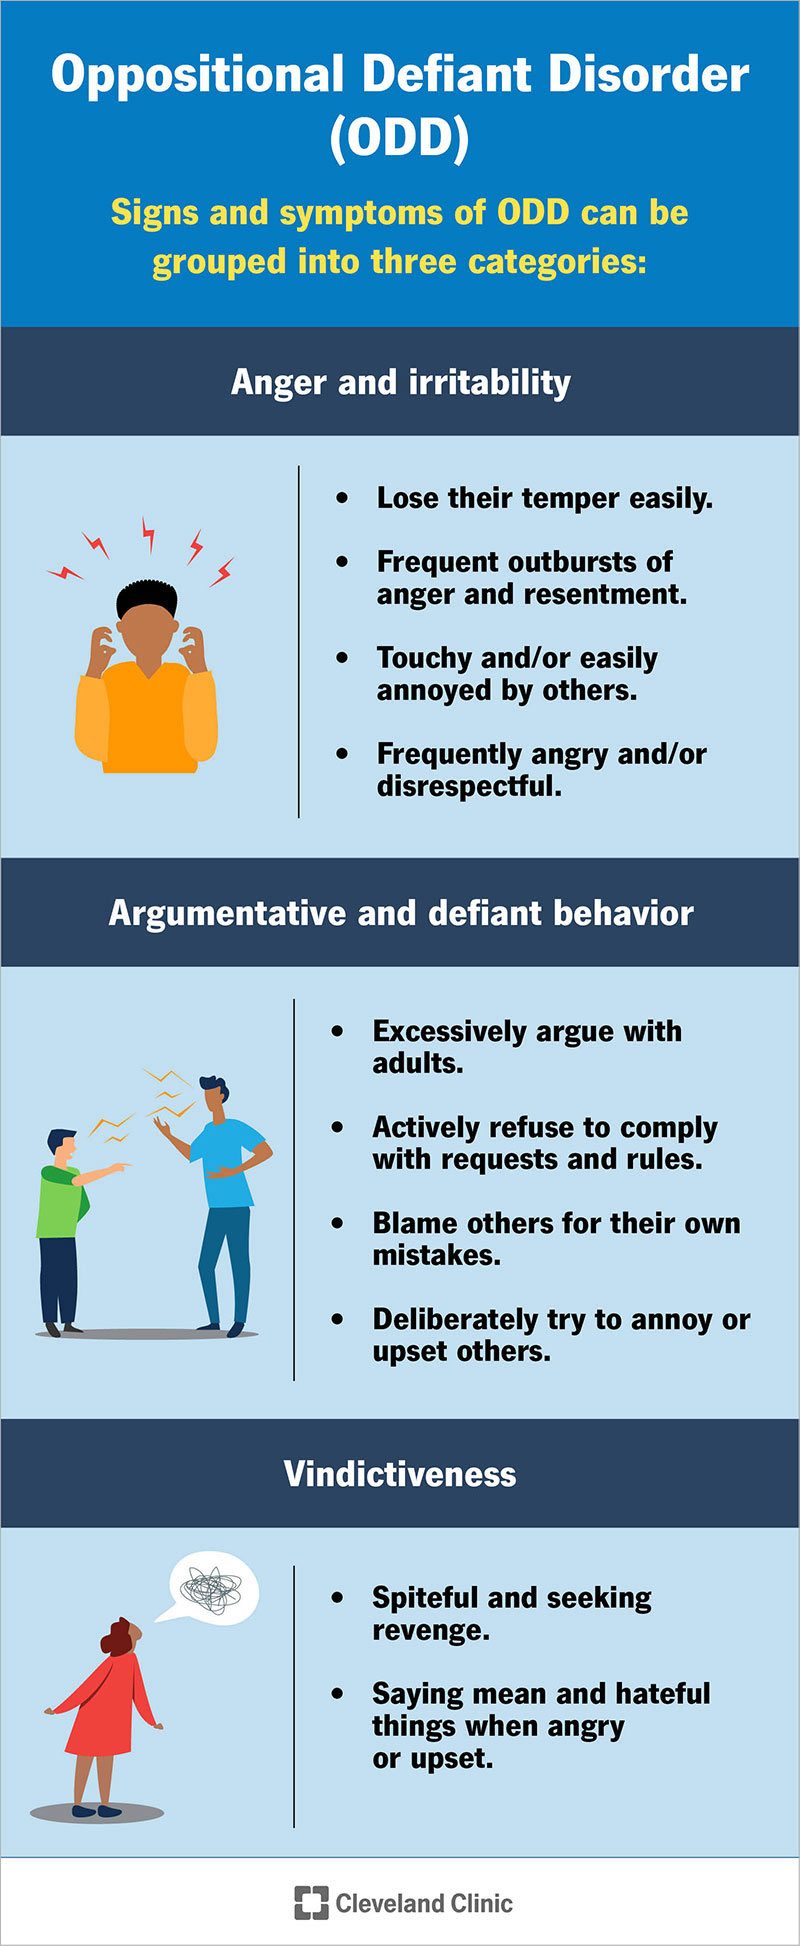 The signs of oppositional defiant disorder include anger and irritability, defiant behavior and vindictiveness.